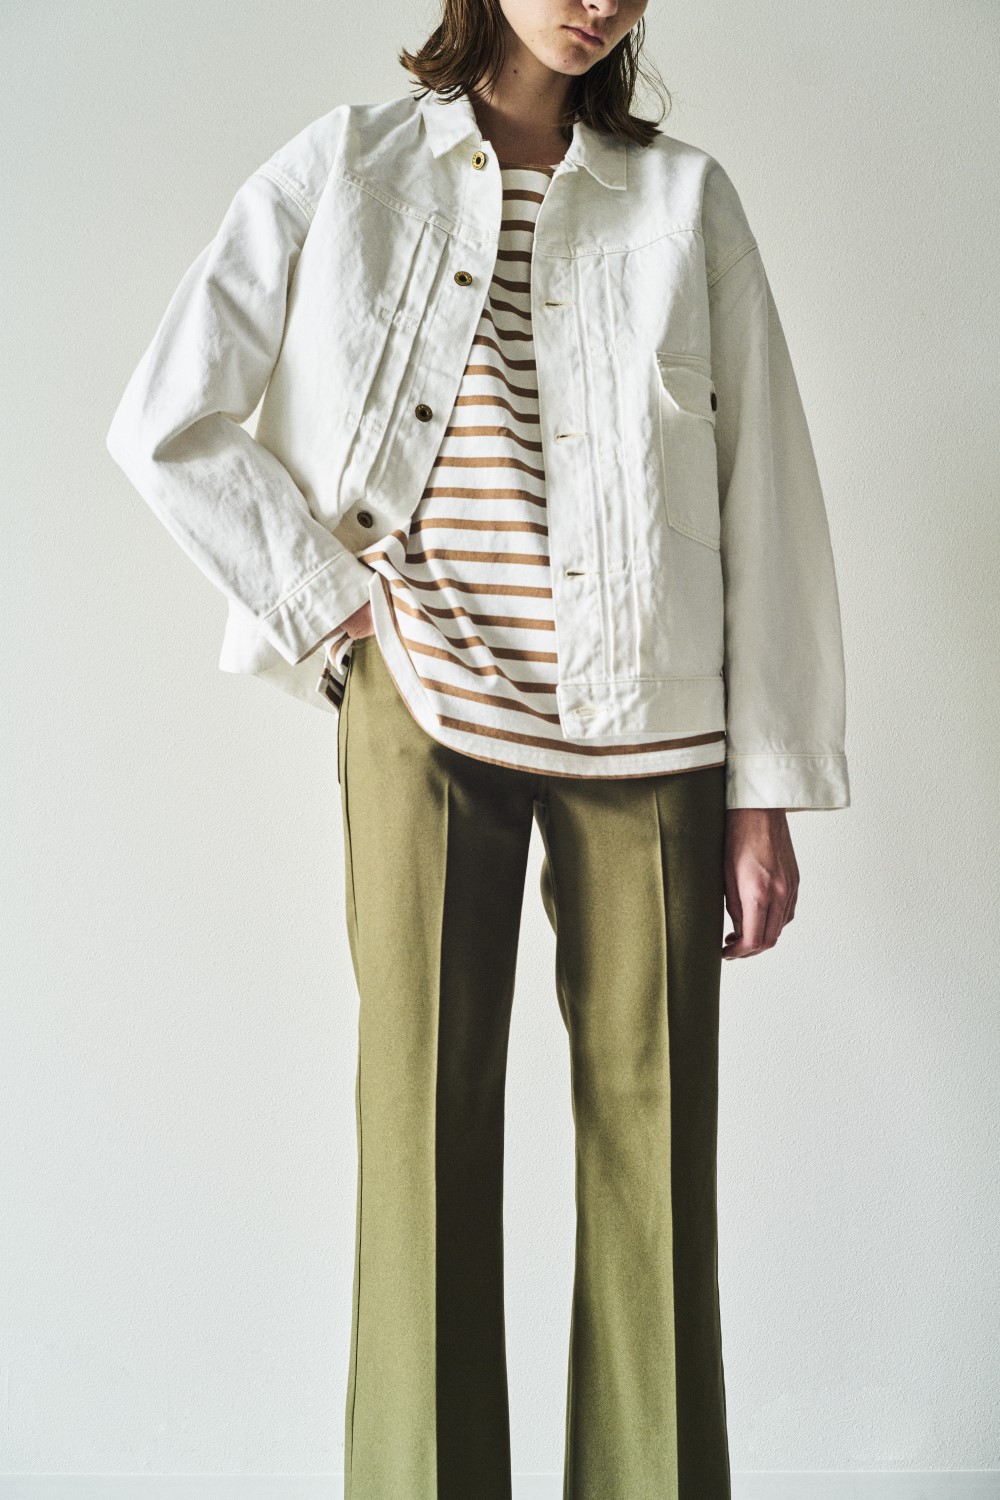 【2022 SPRING&SUMMER】Attick by Johnbull LOOK アイテム